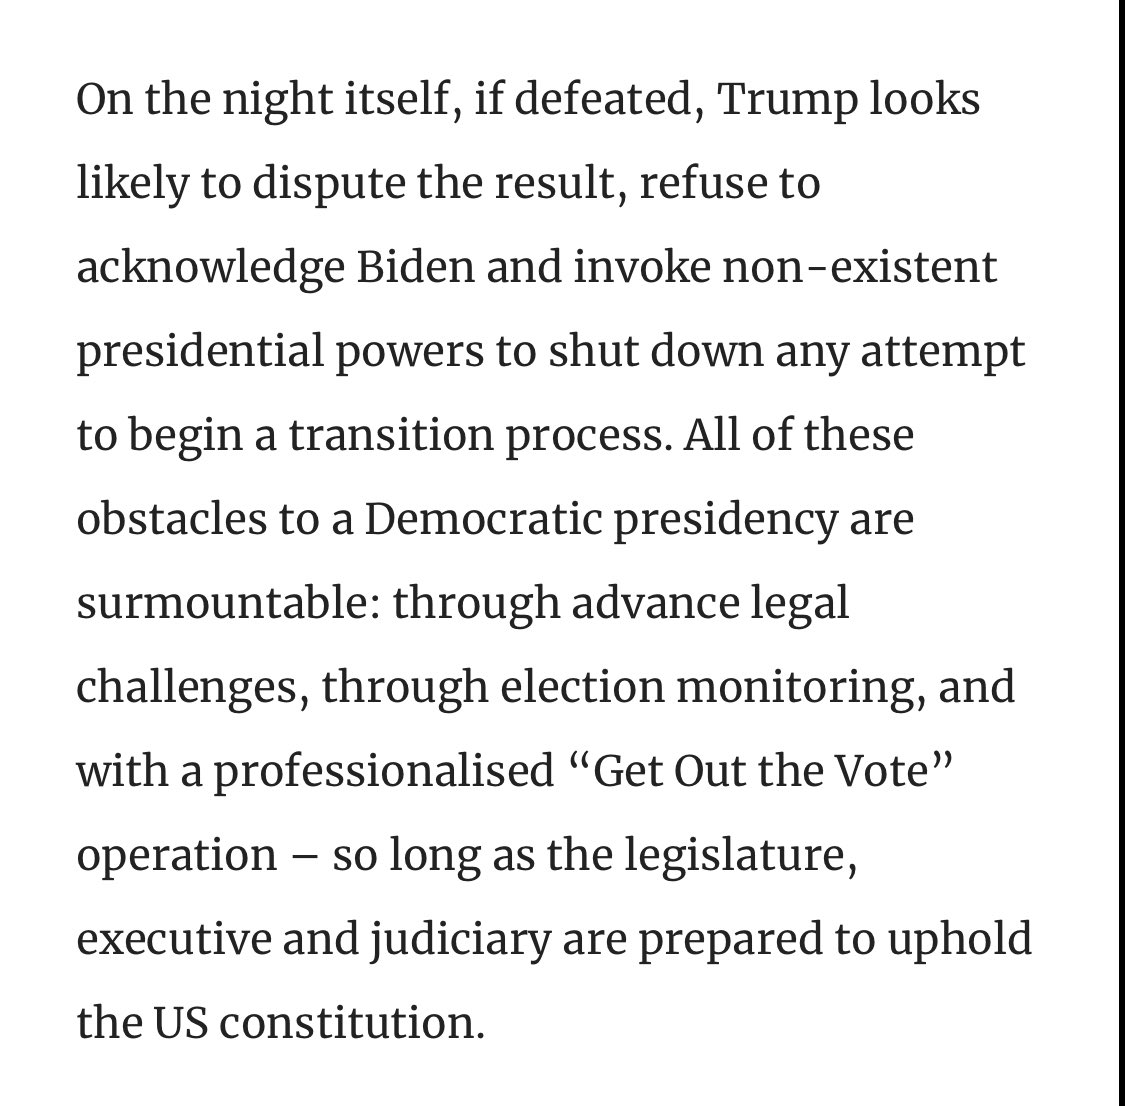 Trump can be forced to vacate the White House but ...  https://www.newstatesman.com/world/north-america/2020/08/democrats-need-plan-stop-donald-trump-stealing-election